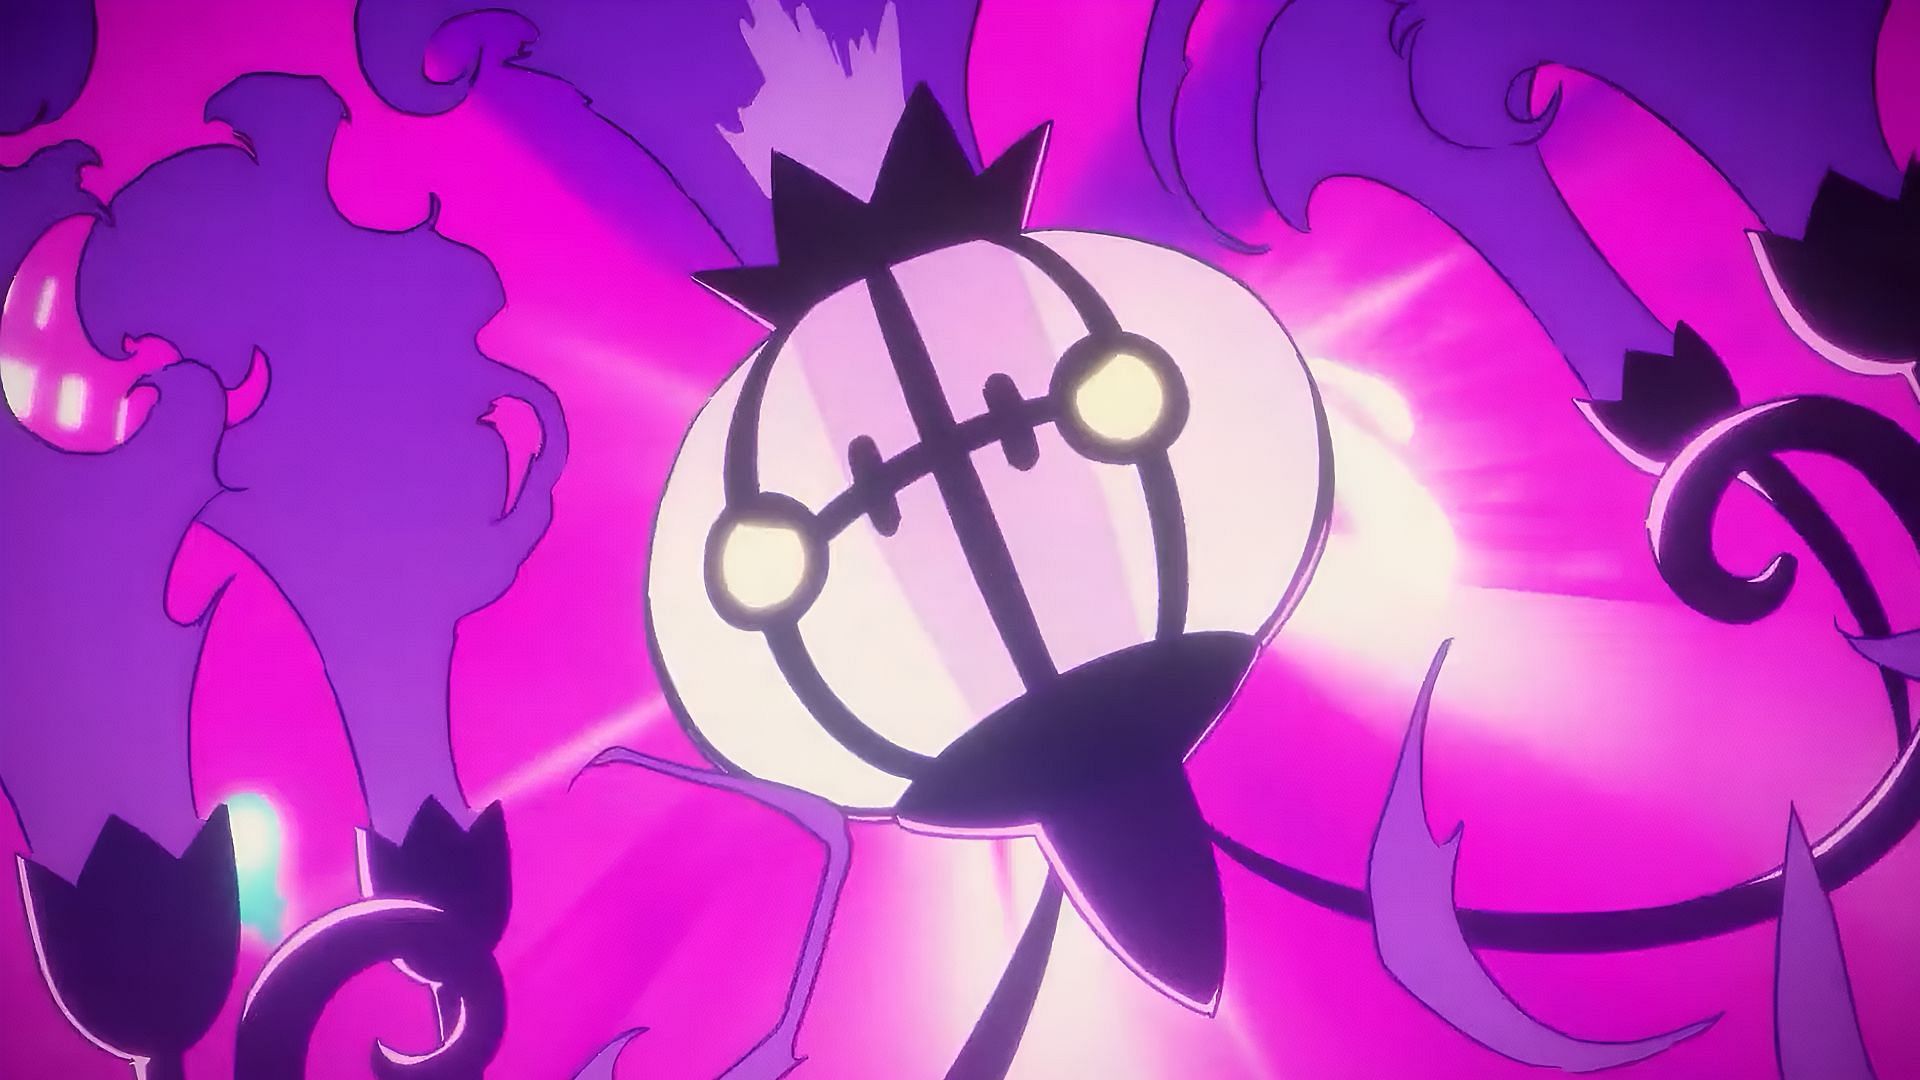 Chandelure can bring pain in Pokemon GO with either Ghost- or Fire-type moves (Image via The Pokemon Company)